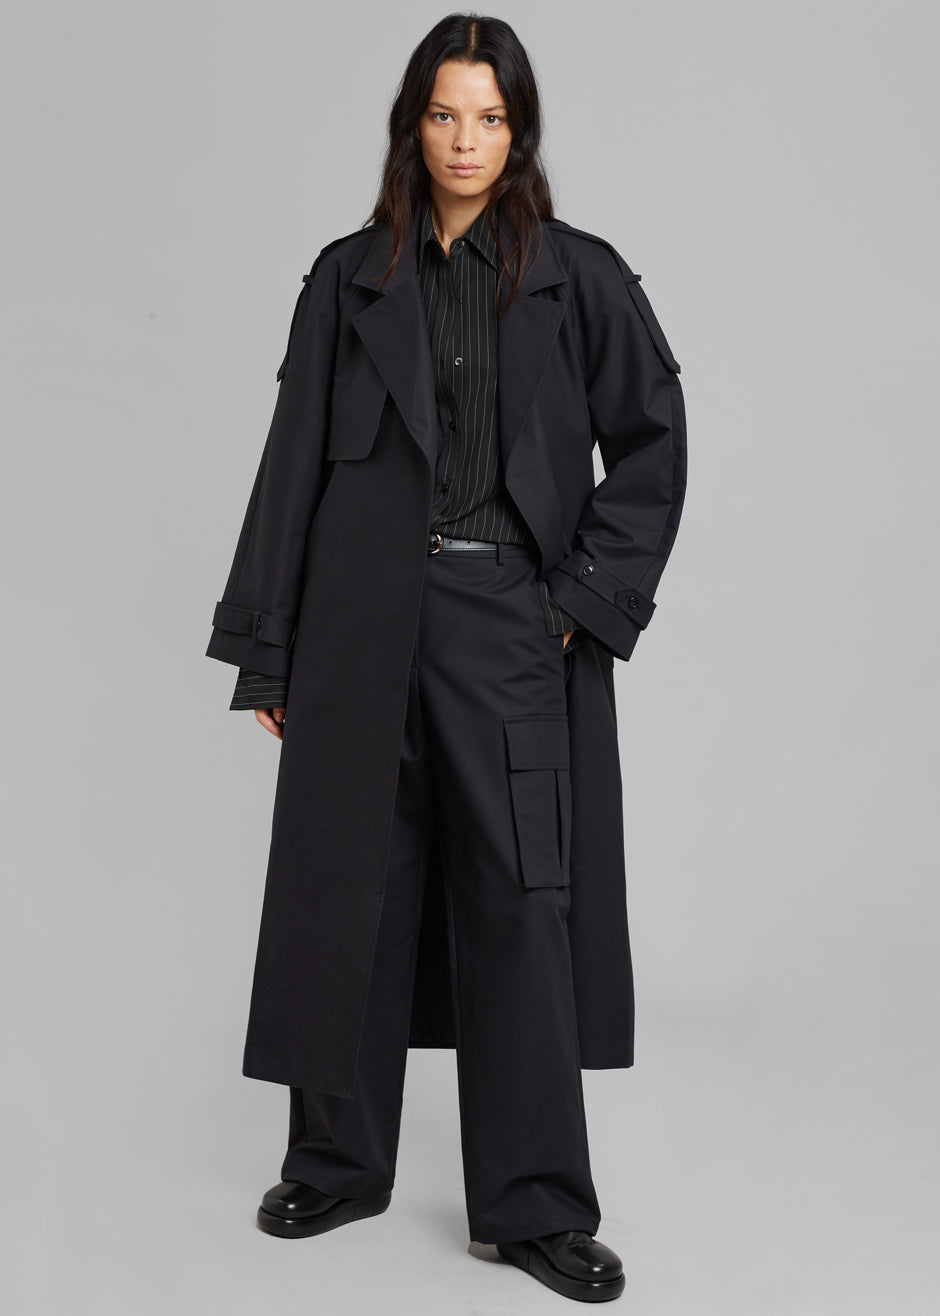 Suzanne Trench Coat - Black - 3